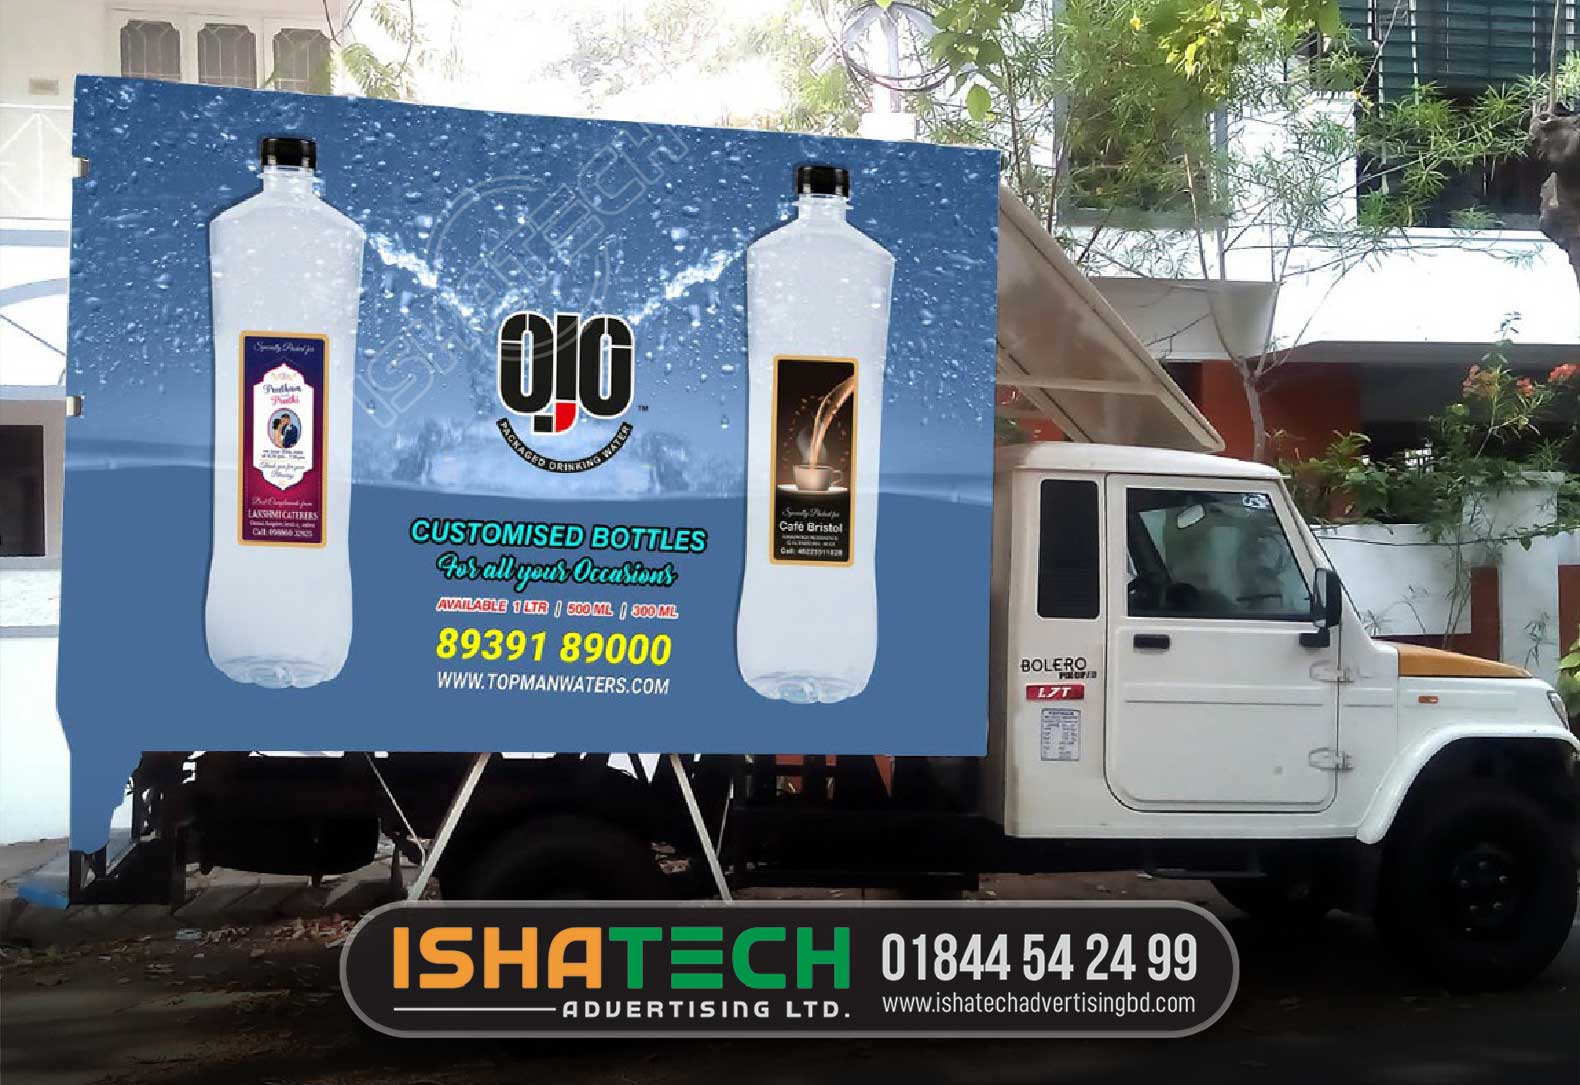 Car Bus Van Truck Vehicle Branding and wrap in Dhaka Bangladesh is a process by which a company or individual can have their car, bus, van, or truck wrapped